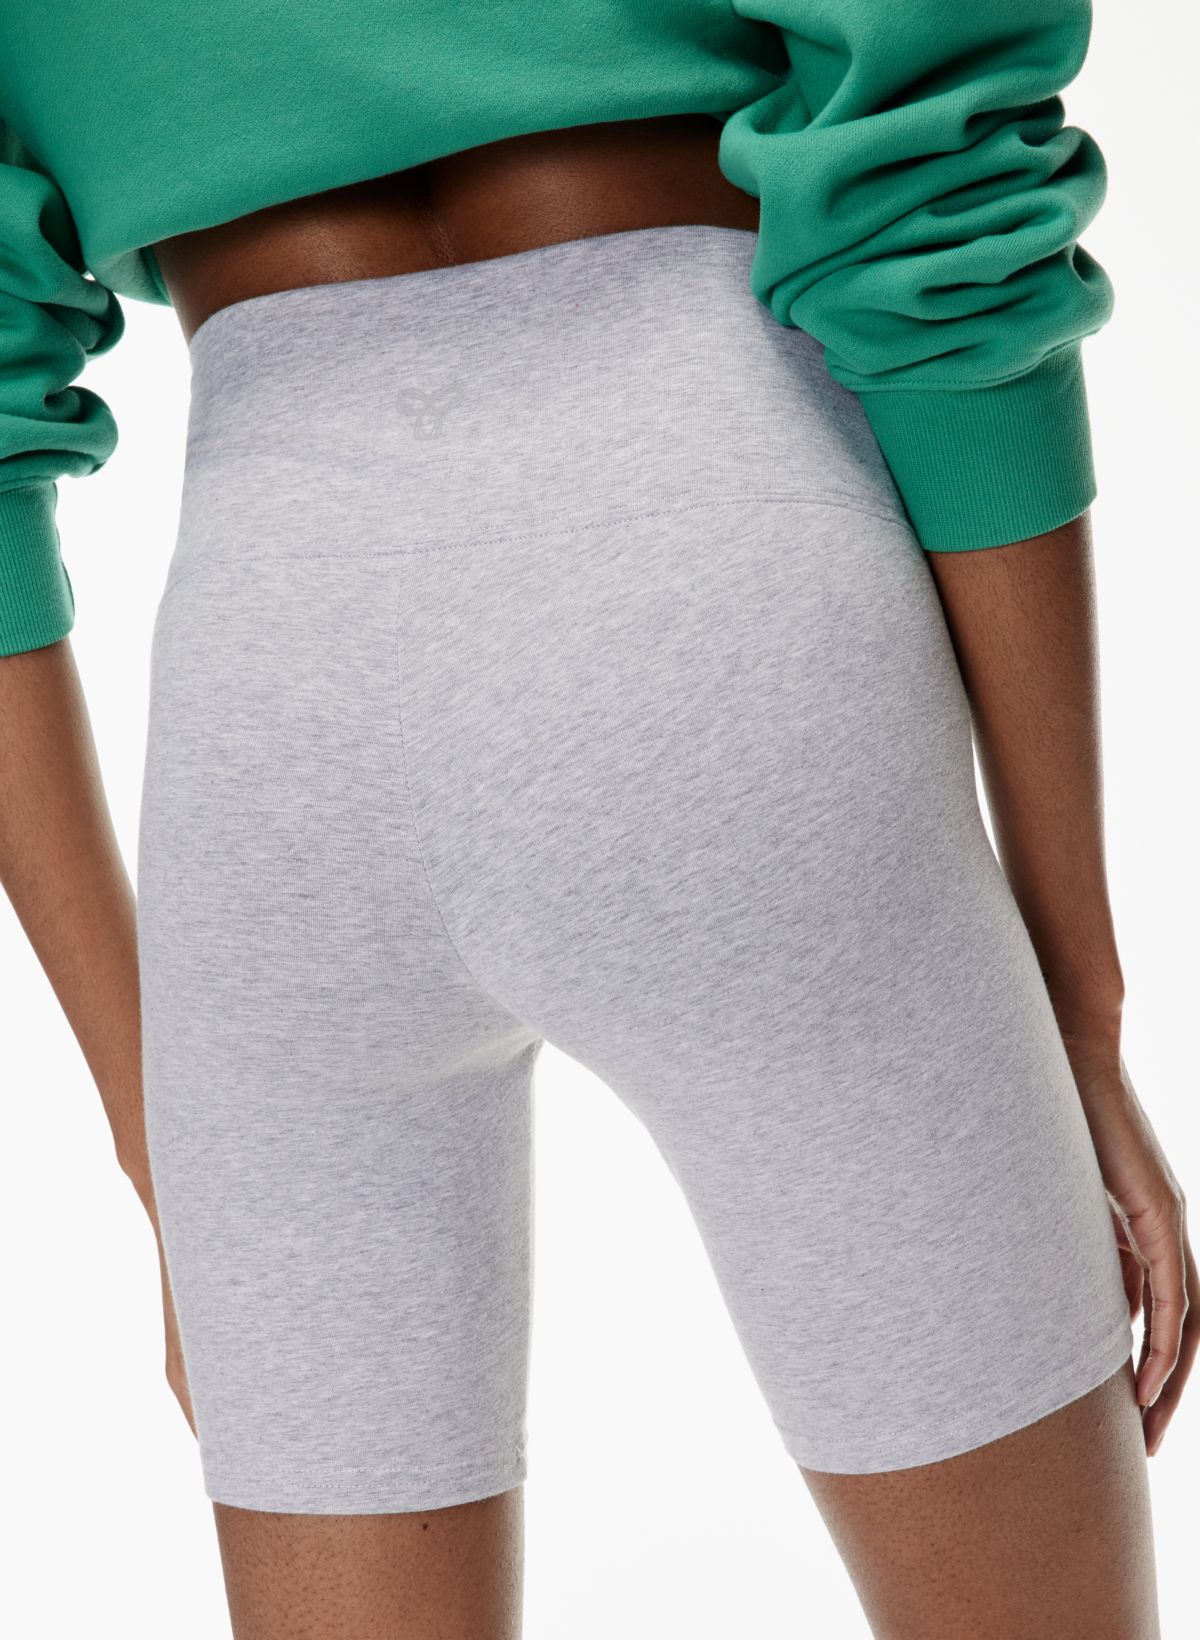 Buy Urban Hug Women Yoga Shorts Pack of 3 Online at Best Prices in